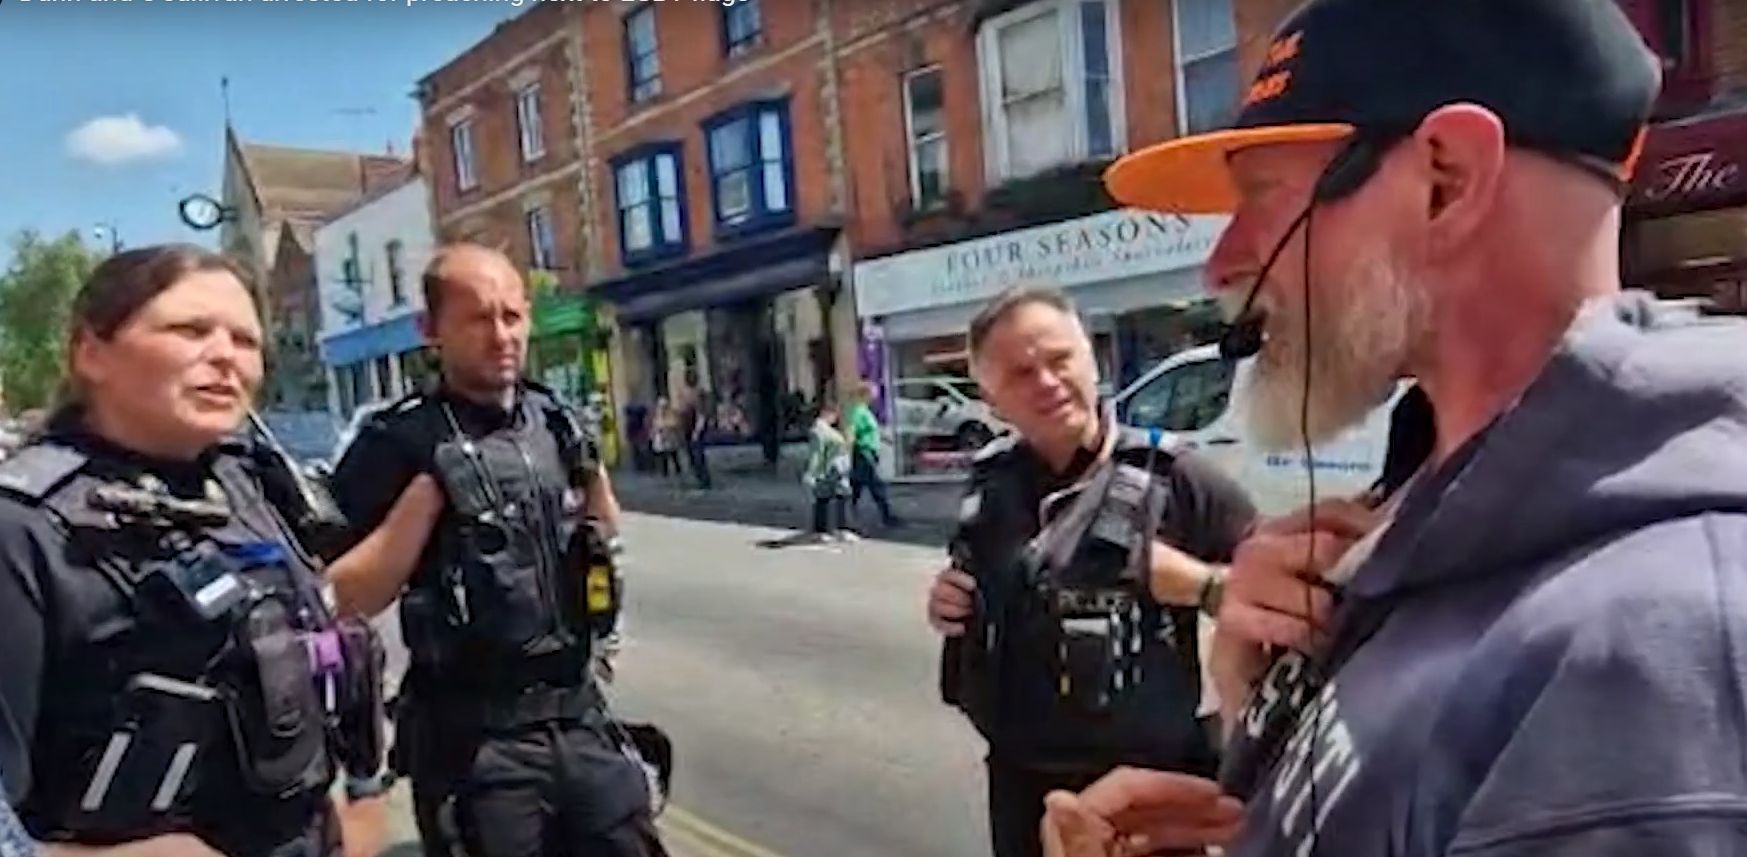 Video footage of police officers talking to the street preachers before their arrest